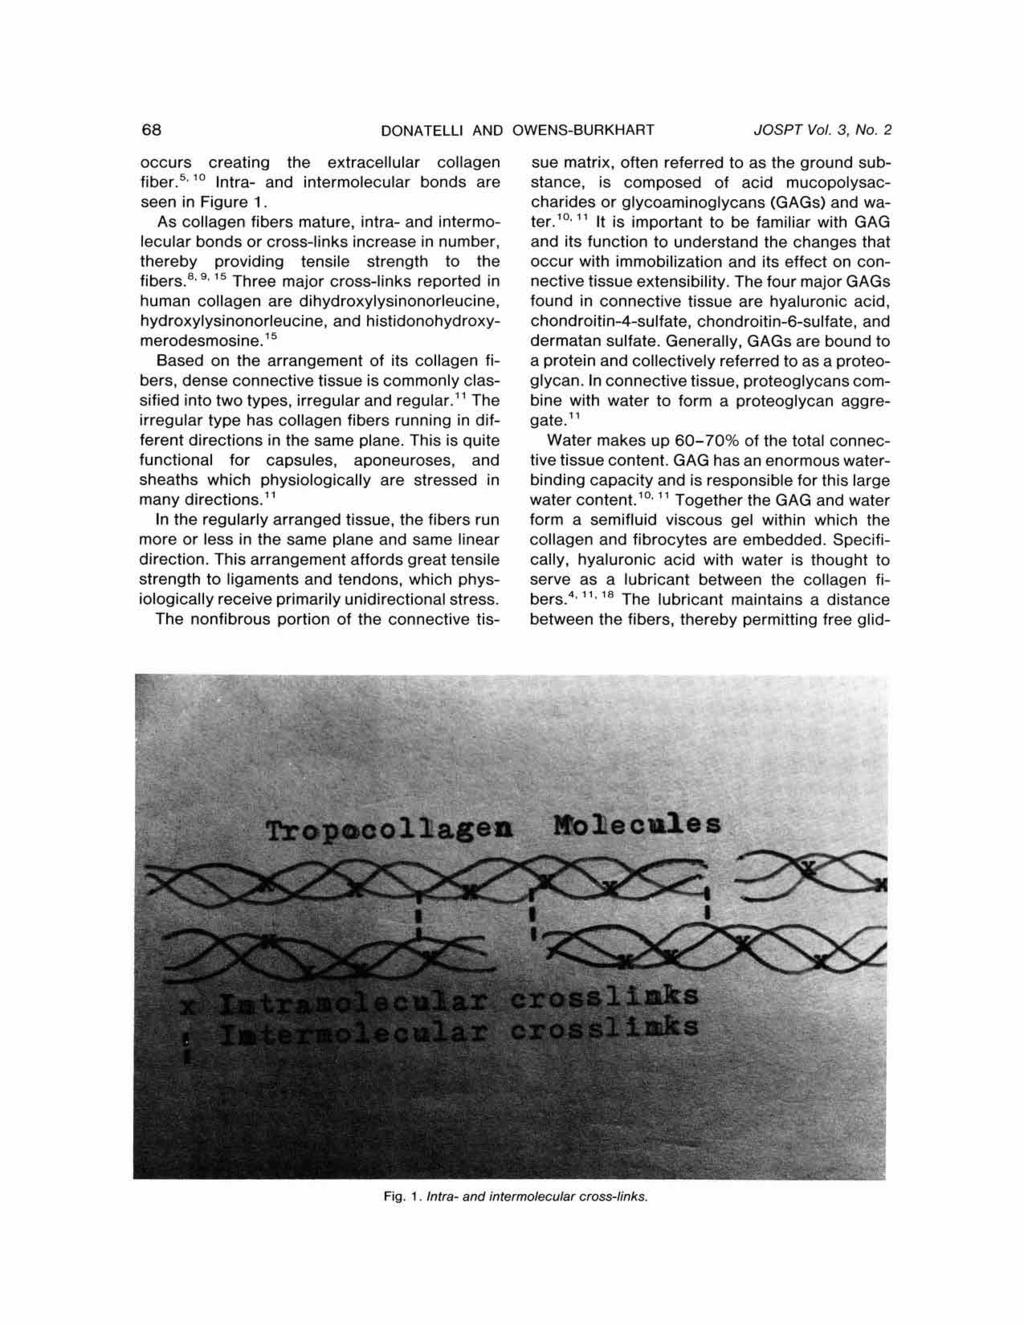 68 DONATELLI AND OWENS-BURKHART JOSPT Vol. 3, NO. 2 Copyright 1981. All rights reserved. occurs creating the extracellular collagen fiber.5. " Intra- and intermolecular bonds are seen in Figure 1.